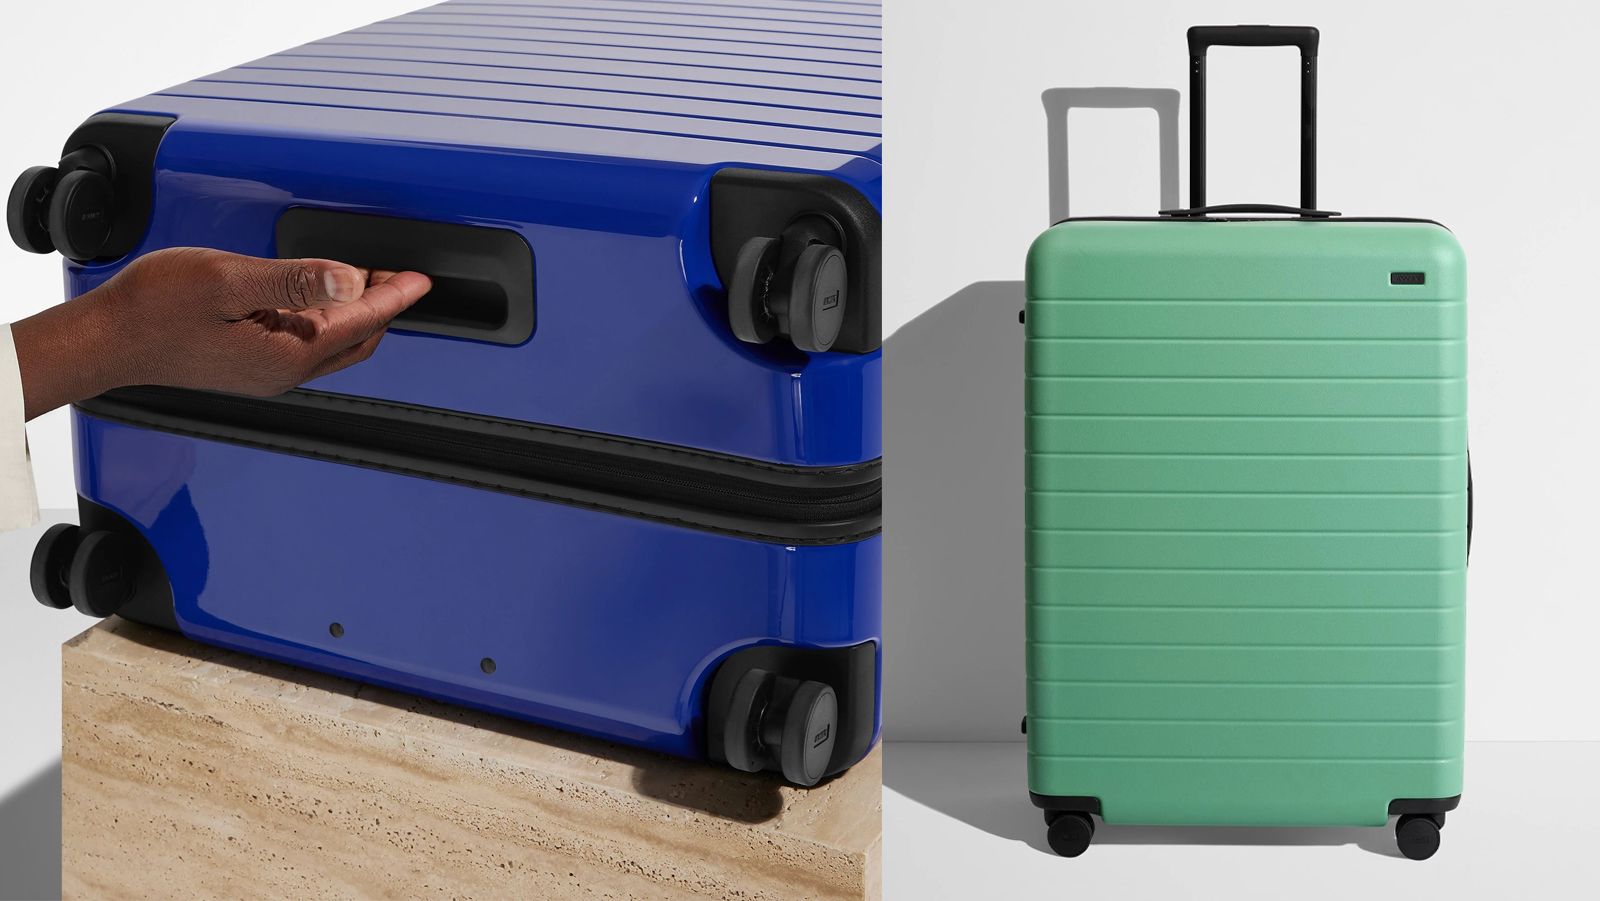 Away rereleased its classic suitcases